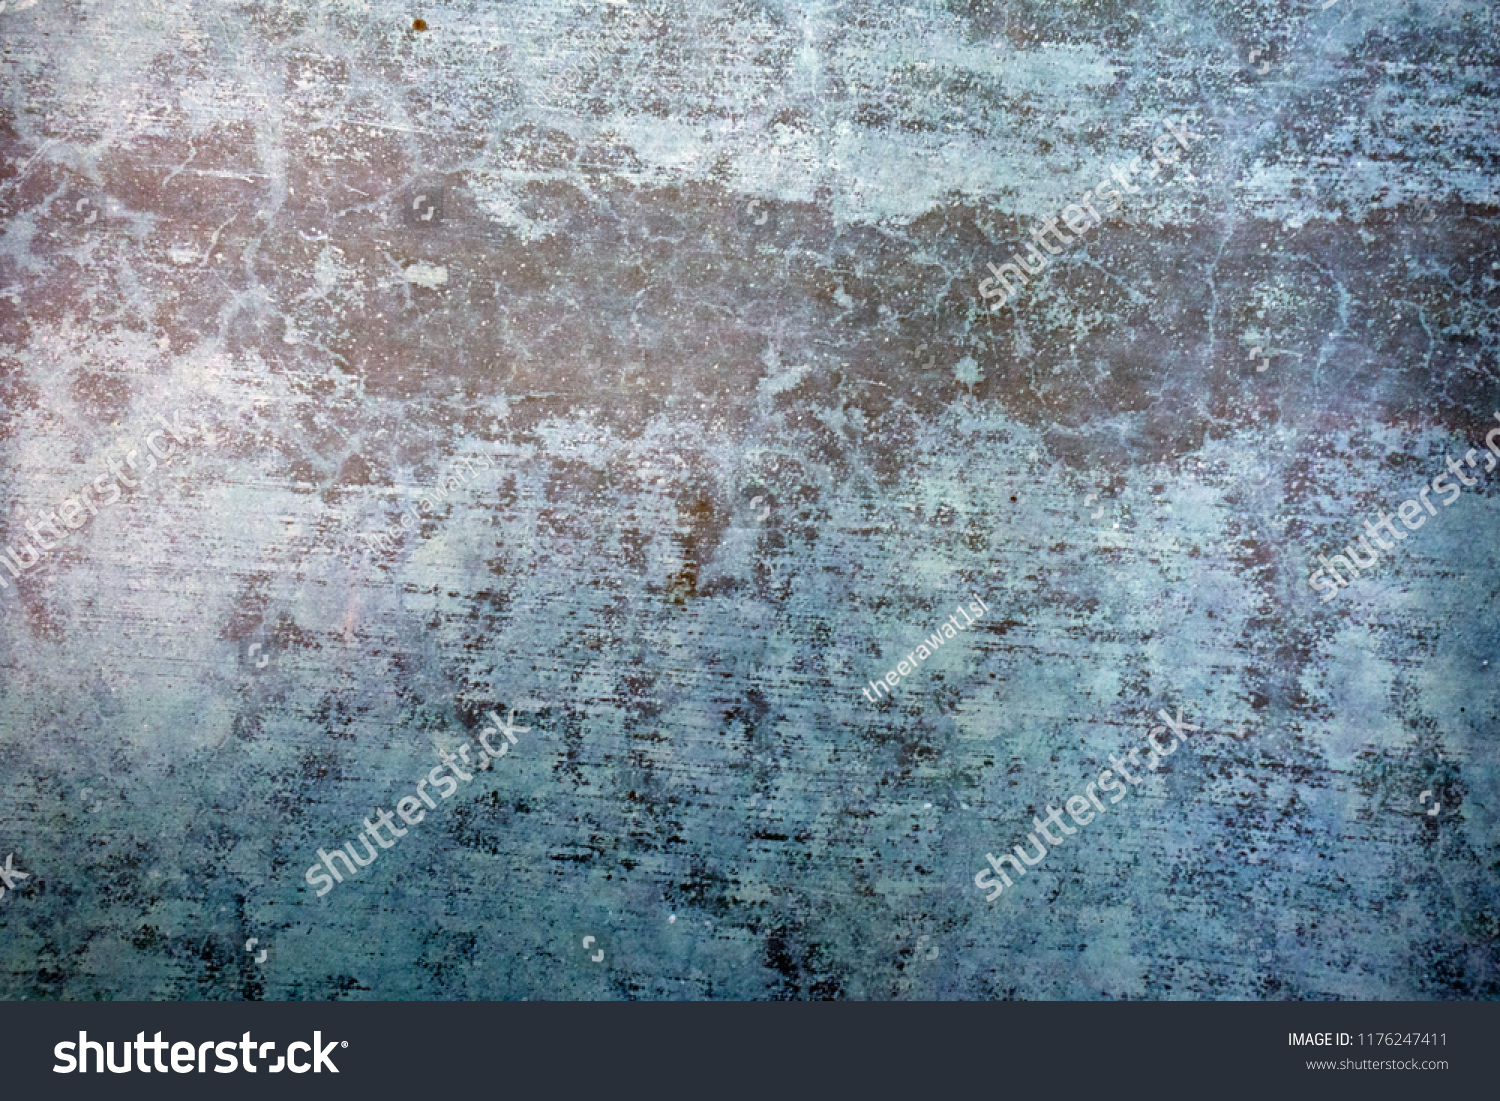 Blue Navy Blue Dark Abstract Background Grunge Decorative Stucco Wall of Art Rough. Texture Banner With Space Text. #1176247411